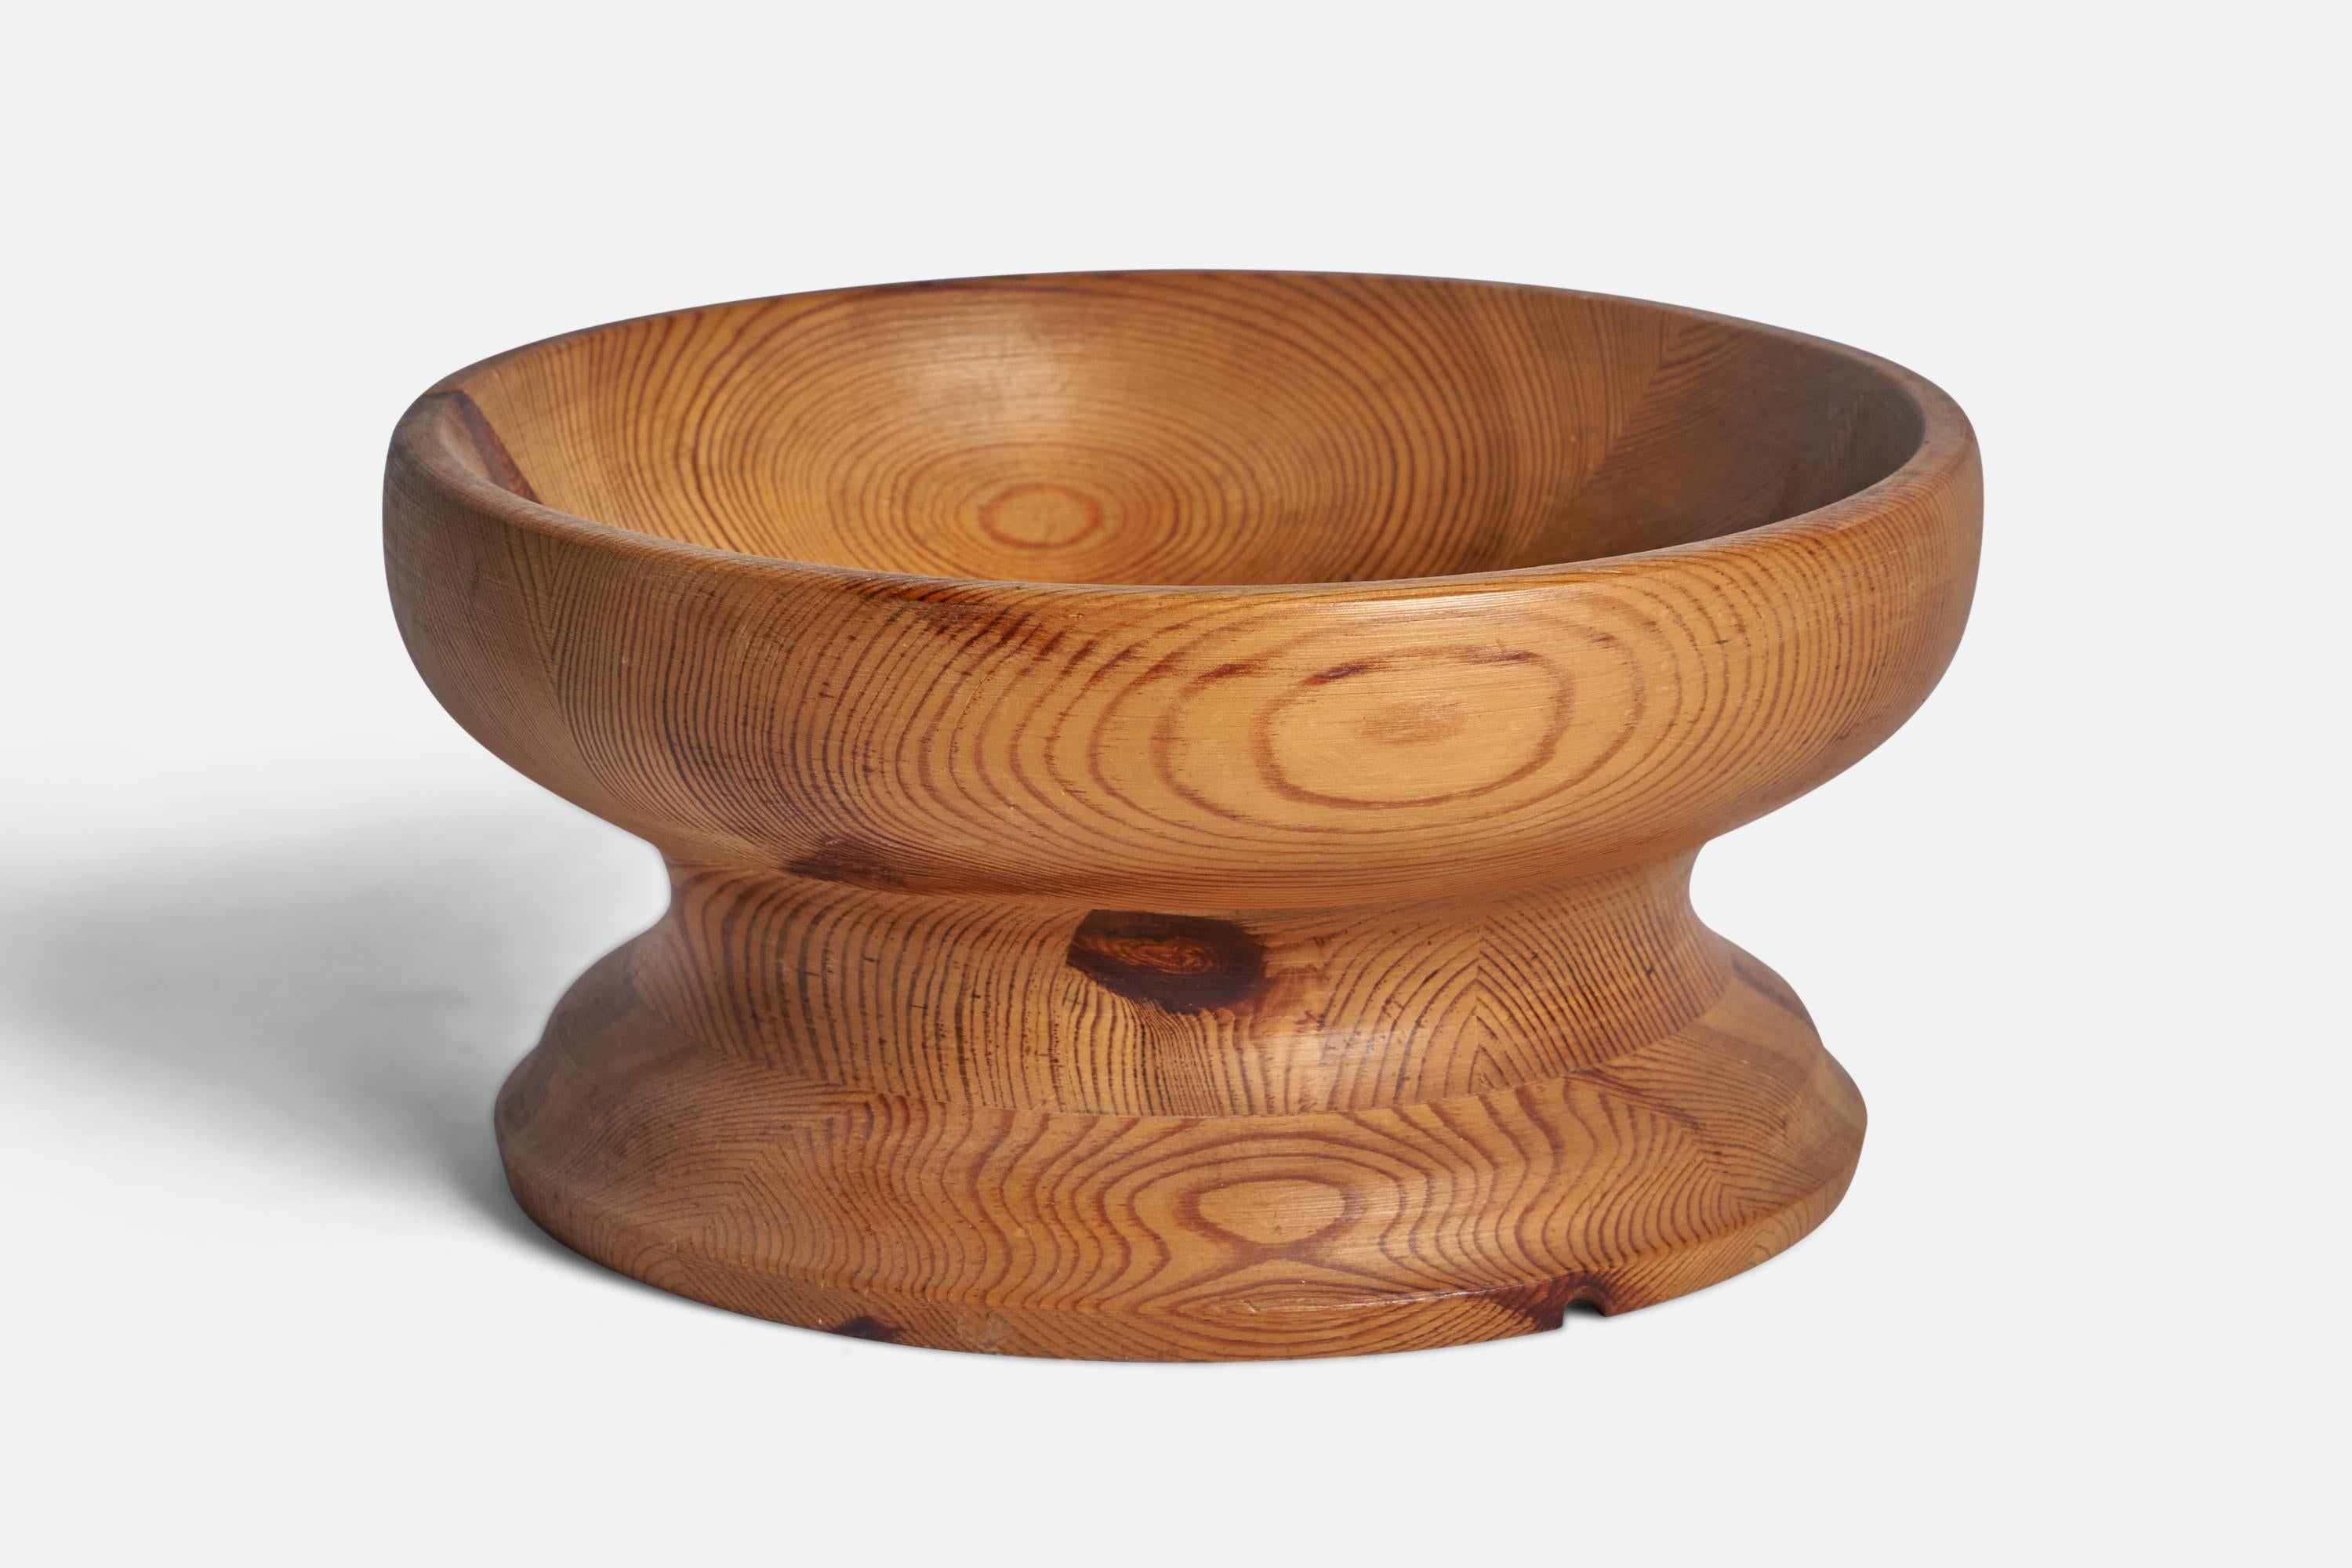 A pine bowl designed and produced in Sweden, c. 1970s.